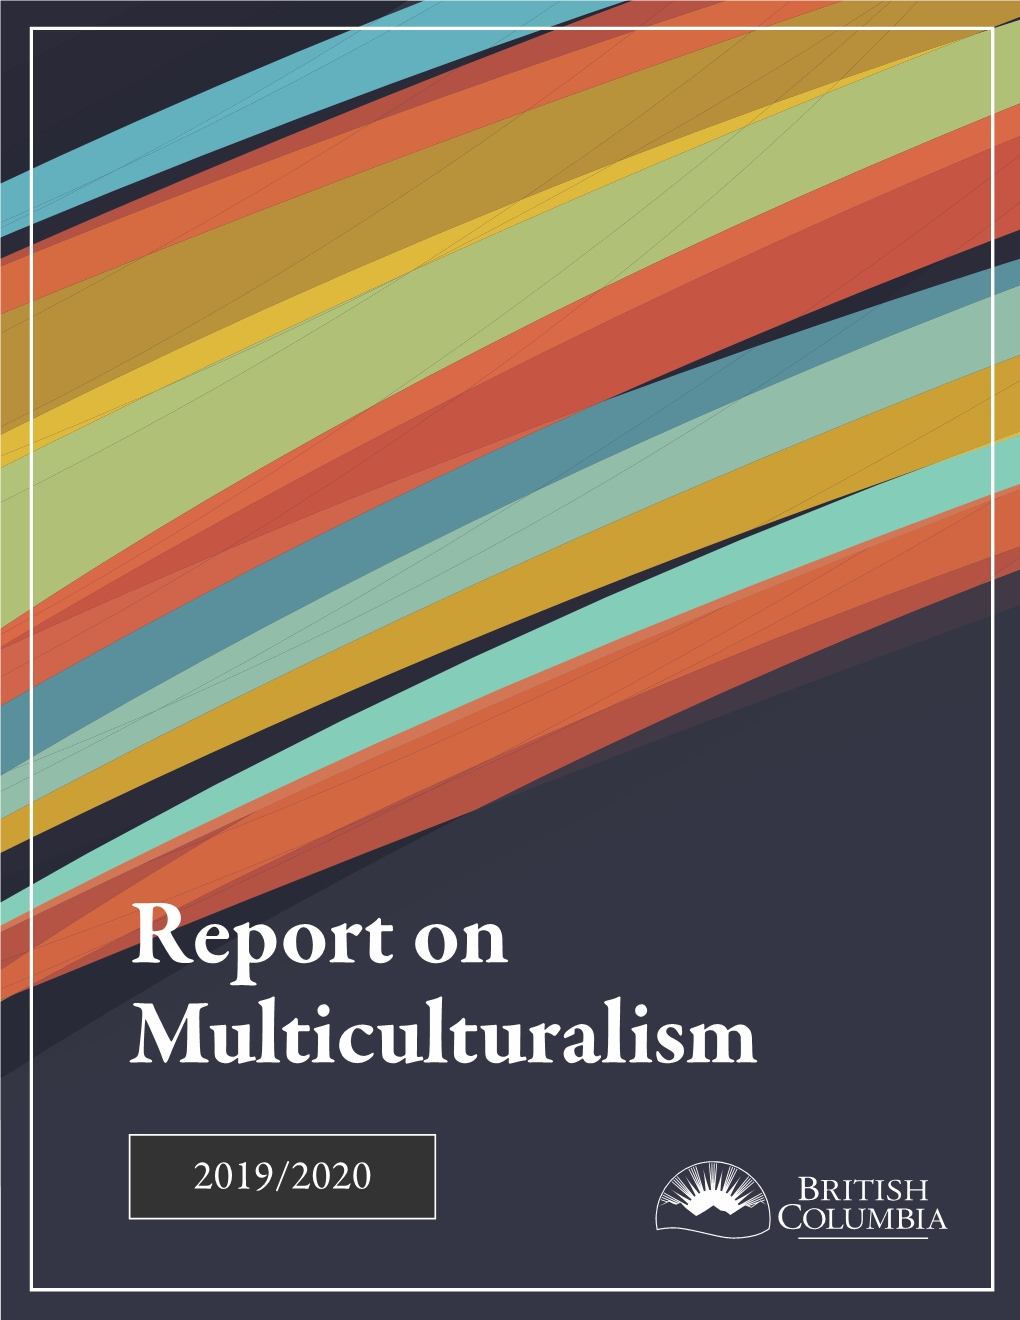 2019/2020 Report on Multiculturalism